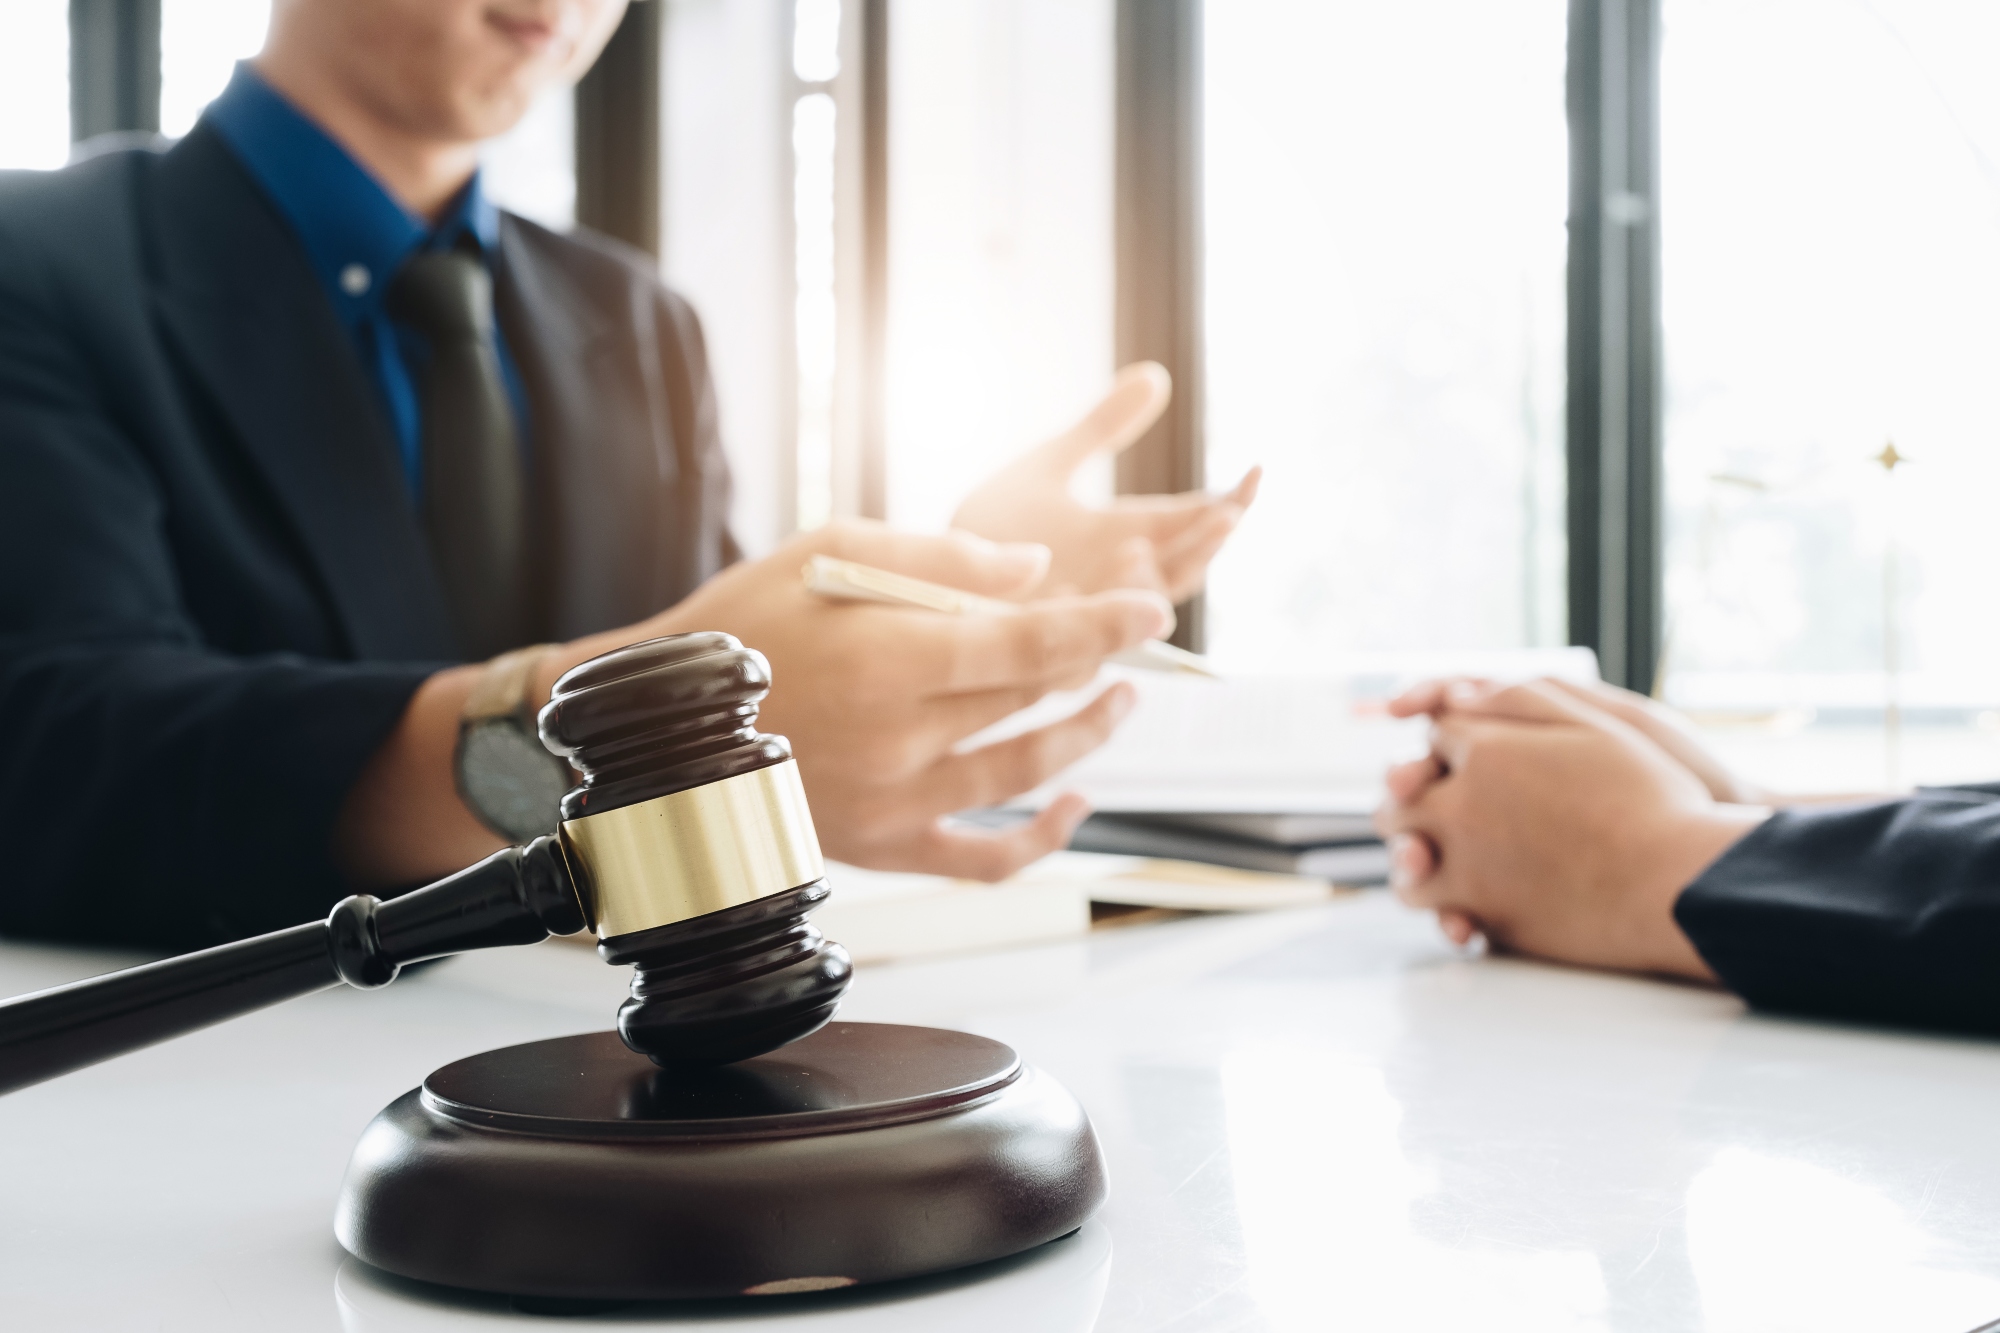 What to do if sued for malpractice